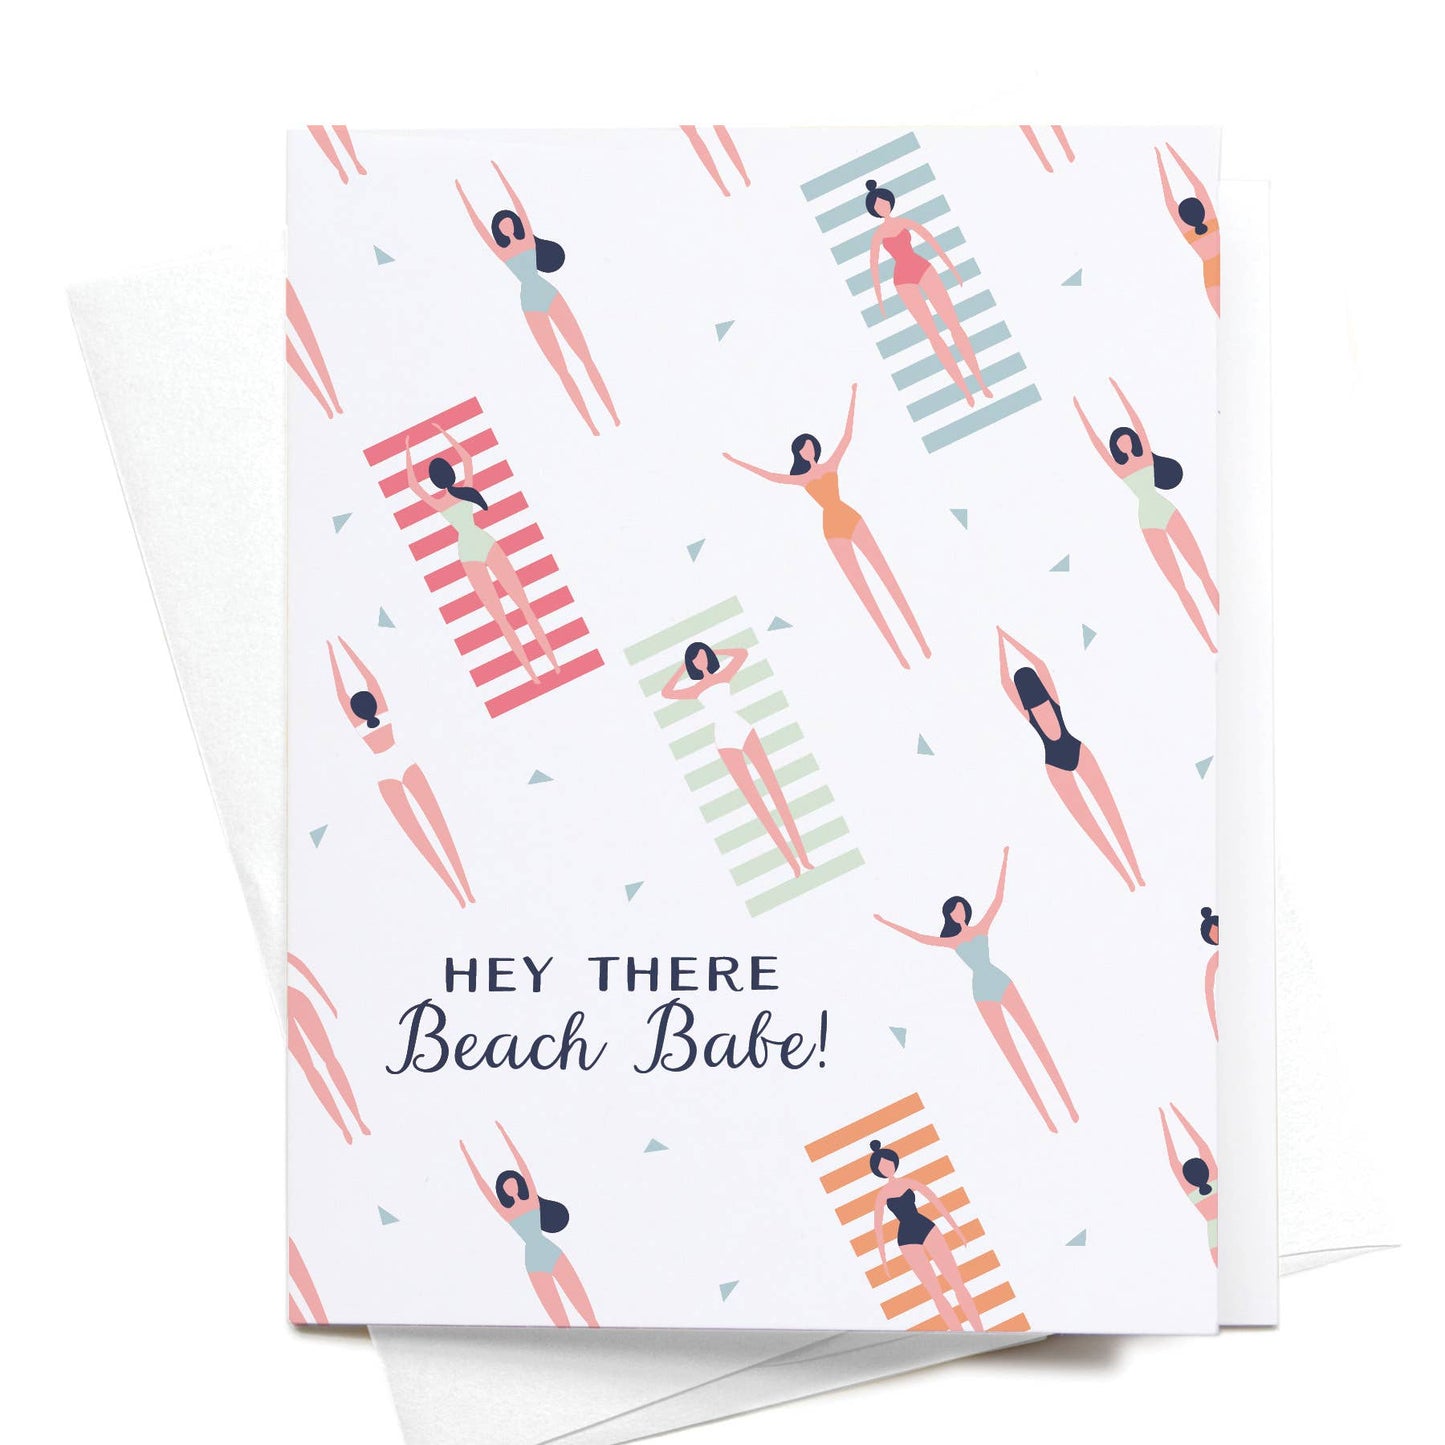 "Hey There Beach Babe!" Greeting Card